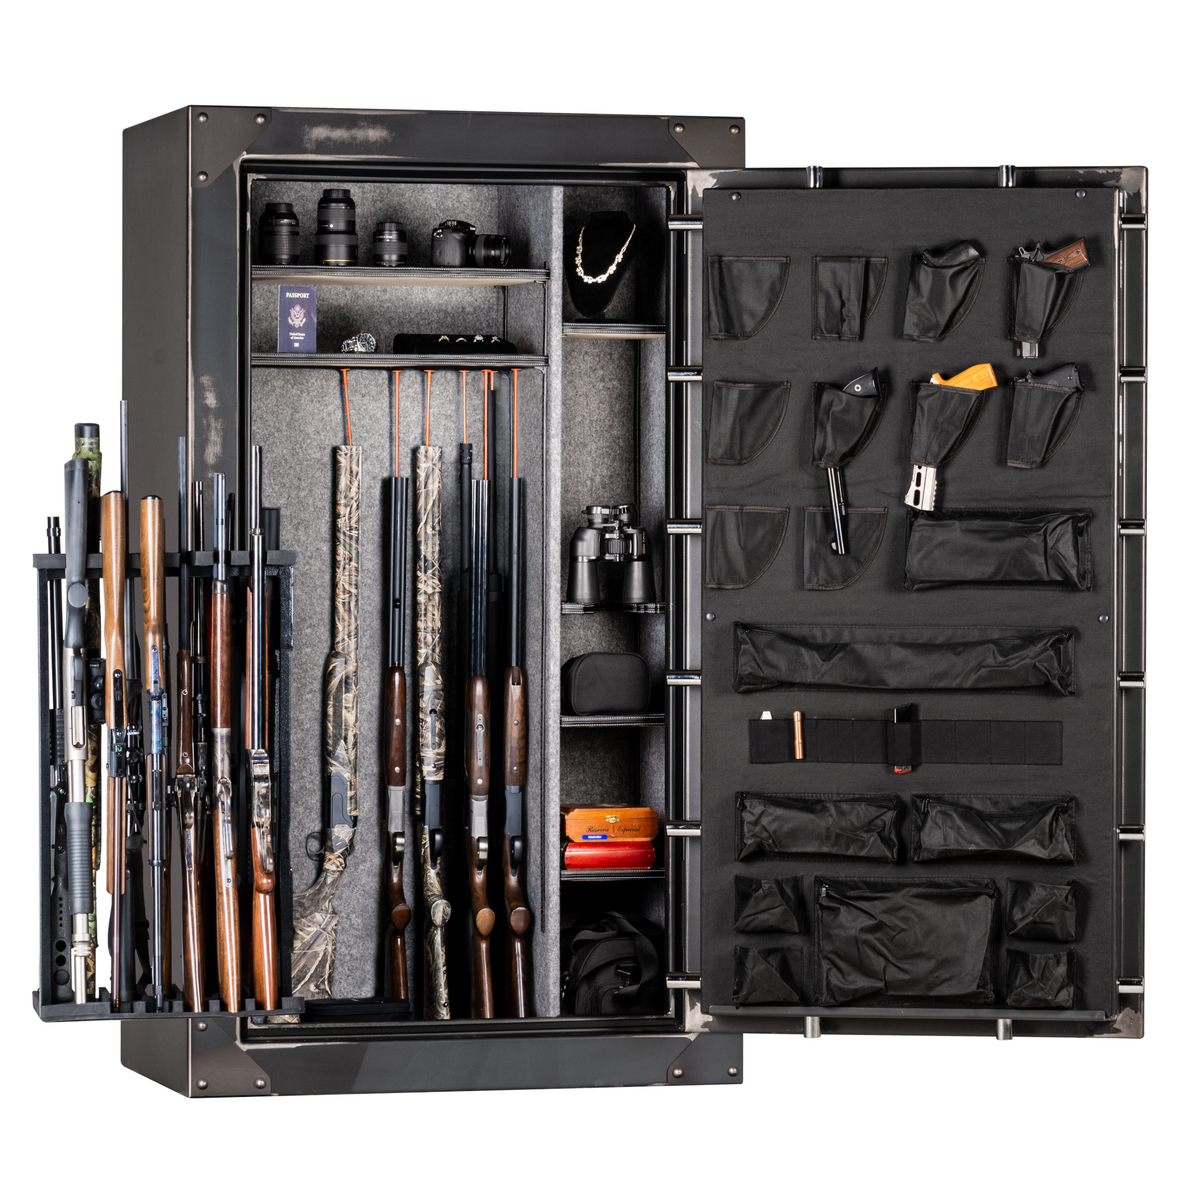 Rhino RSB7242EXSO Door Open at Full Swing and Swing Out Gun Rack at Full Swing